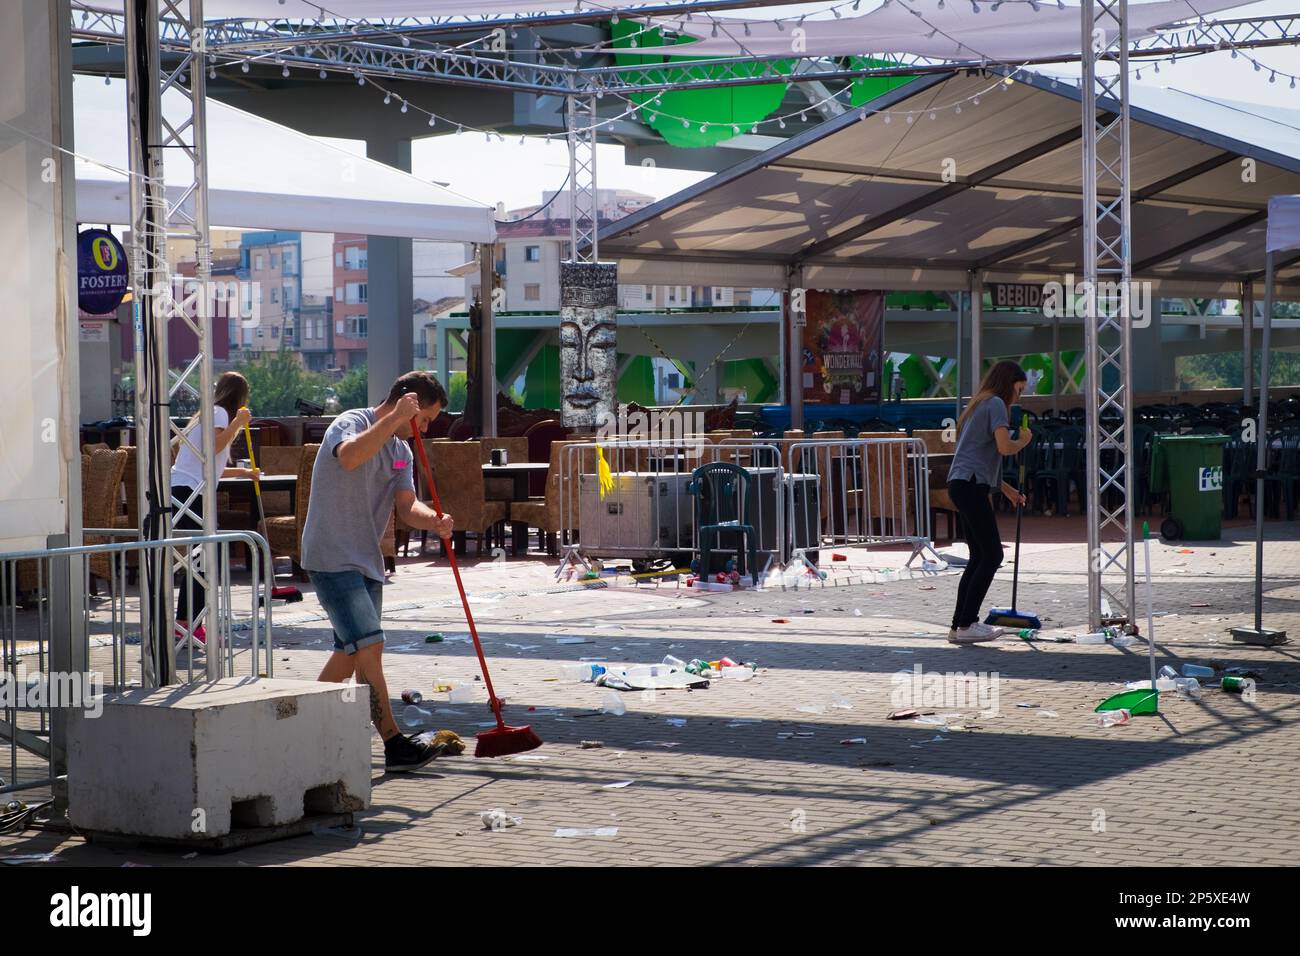 Staff cleaning the stage after a show in Gandia Spain Stock Photo